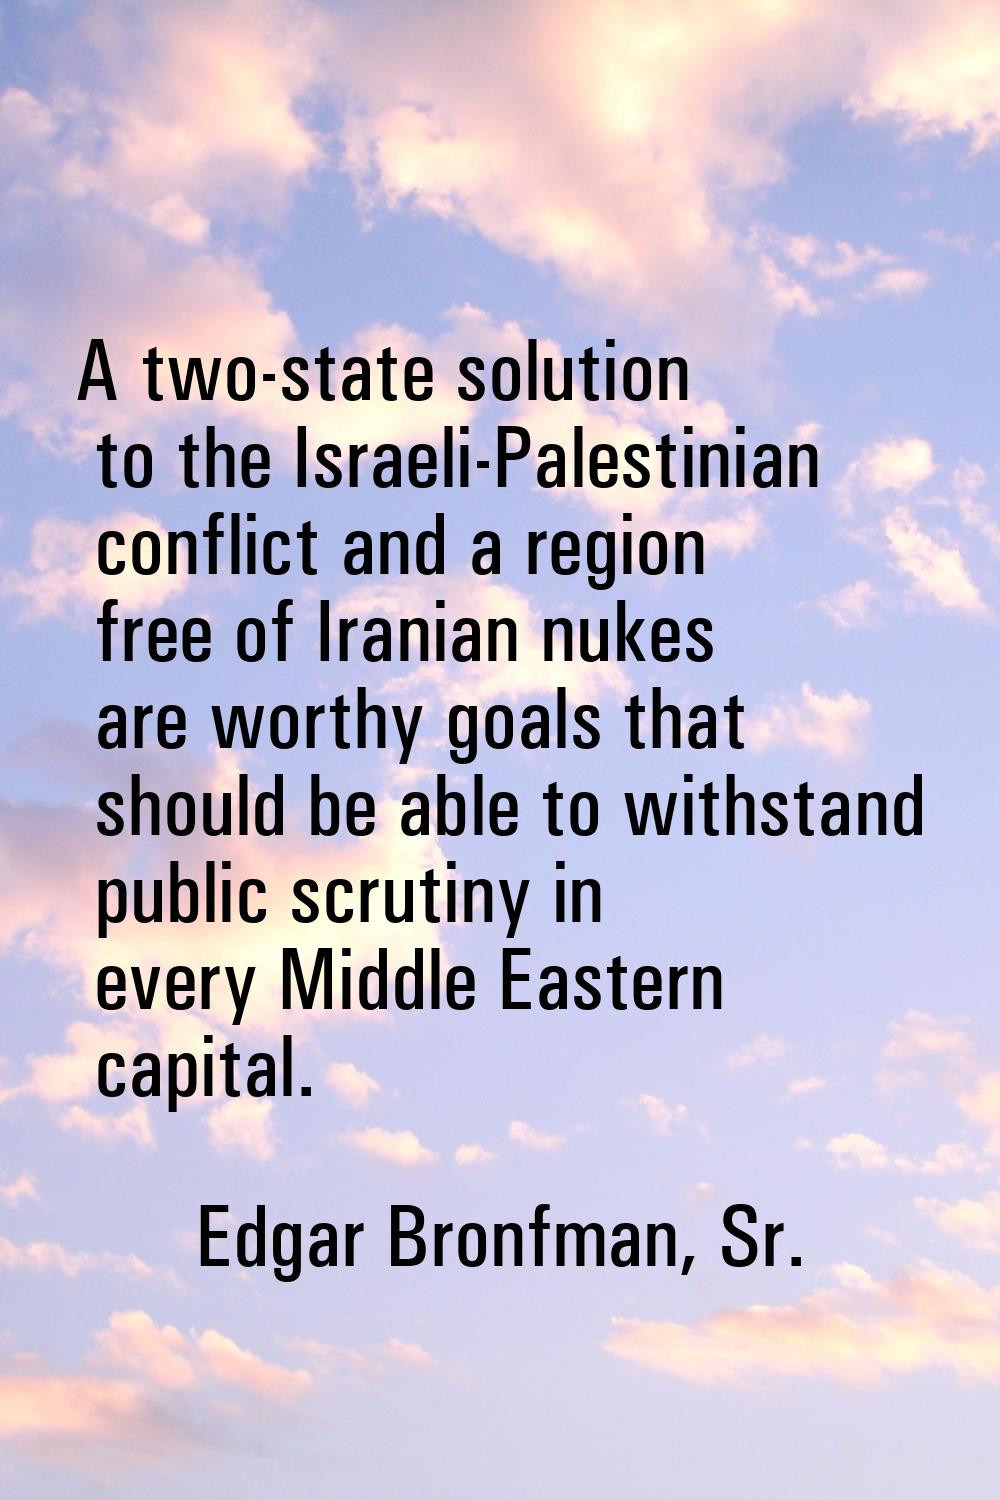 A two-state solution to the Israeli-Palestinian conflict and a region free of Iranian nukes are wor